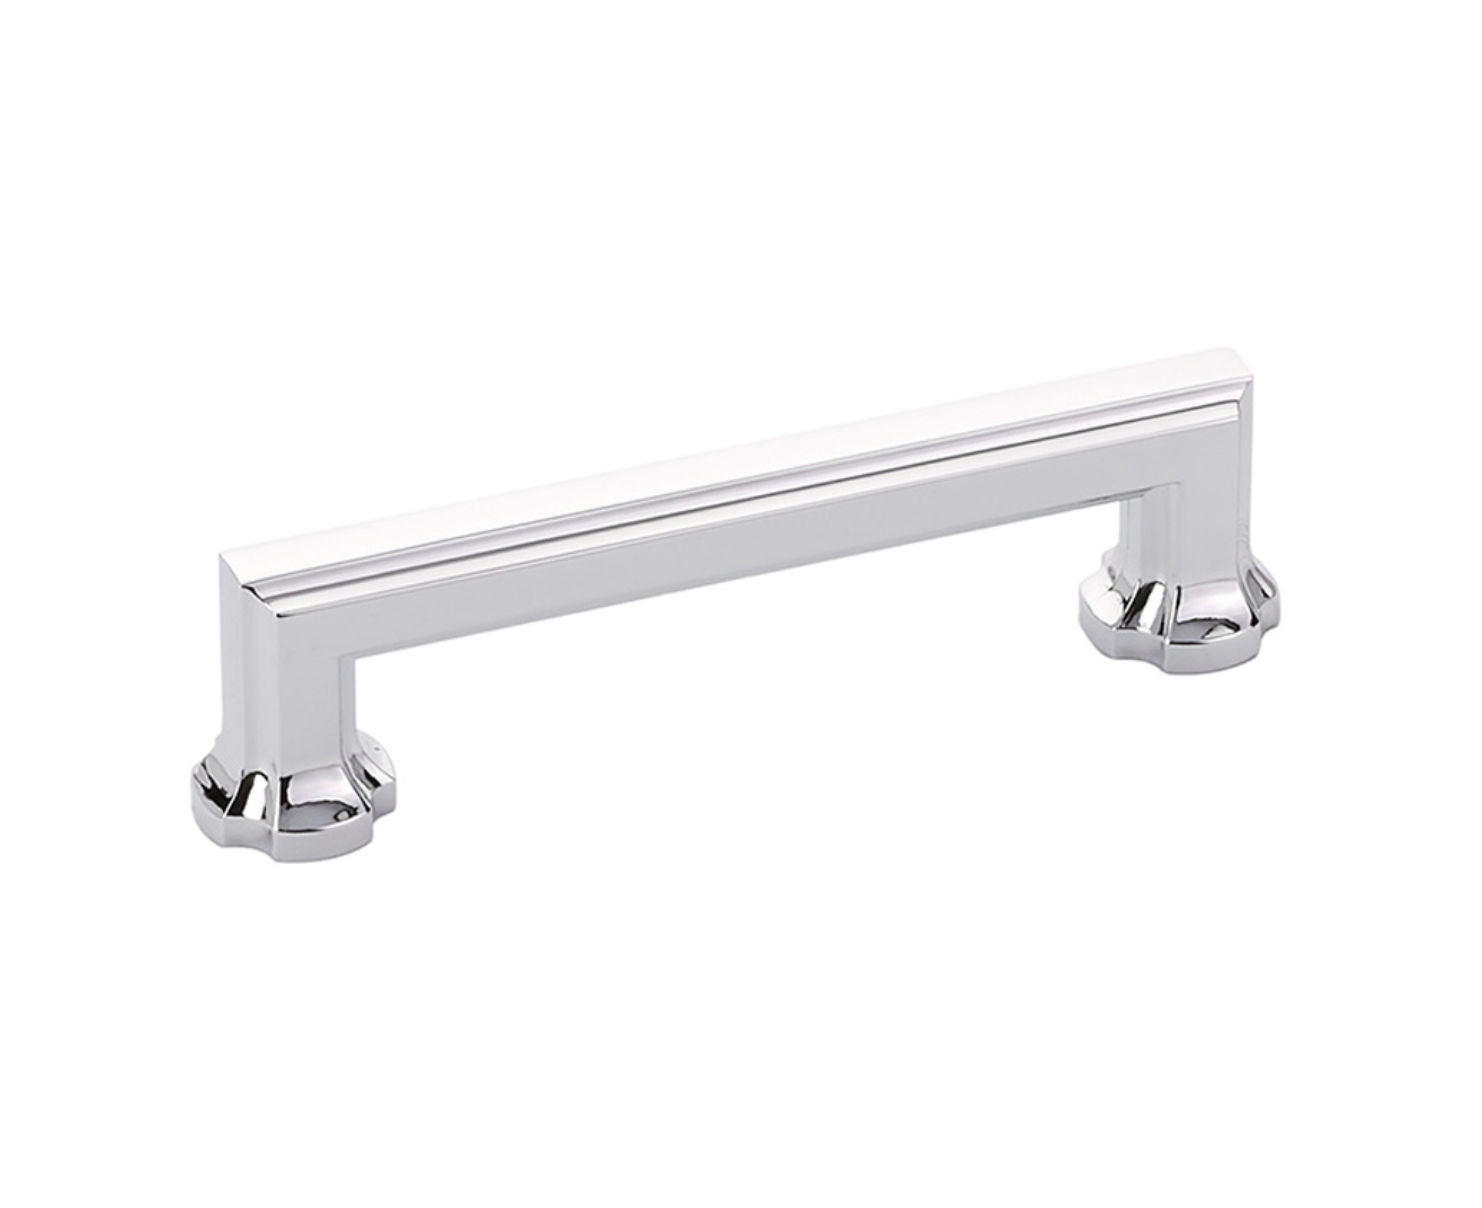 Polished Chrome "Regal" Cabinet Knobs and Drawer Pulls